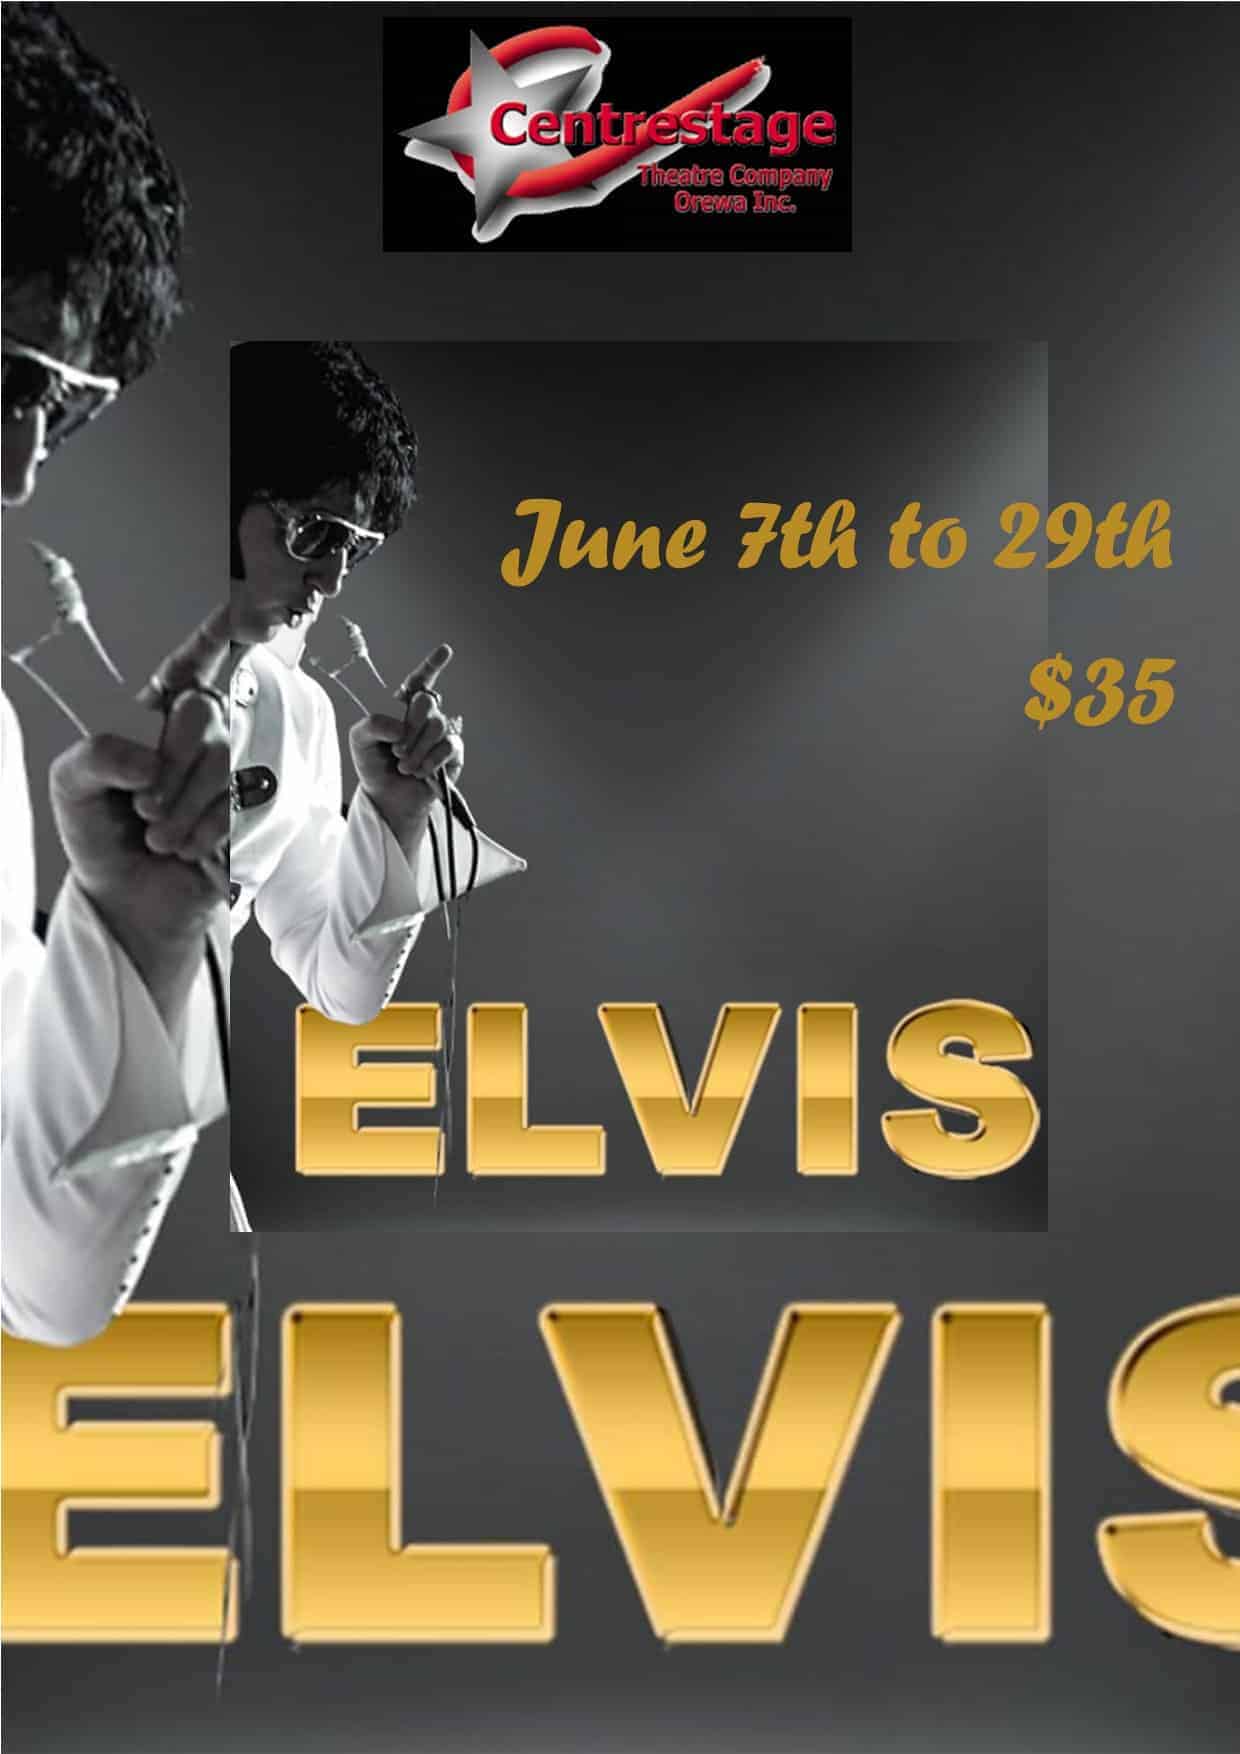 Elvis impersonator show ad with date and ticket price.